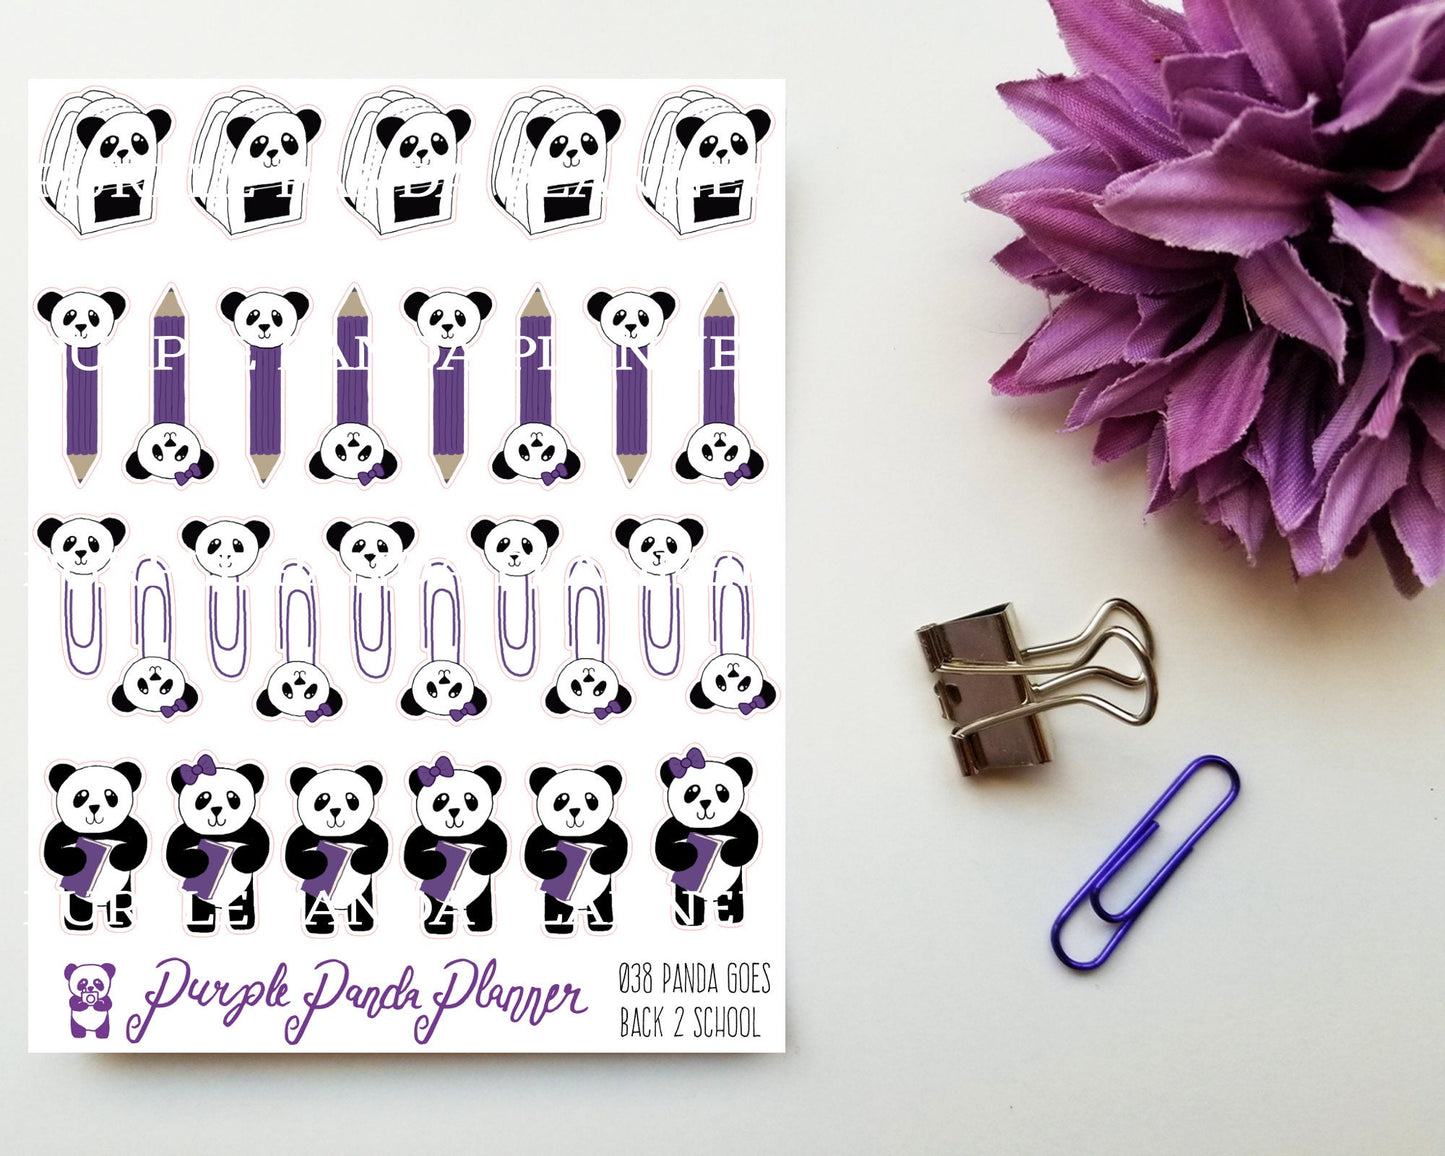 Panda Goes Back 2 School 038 Planner or Bullet Journal Stickers for Functional Planning